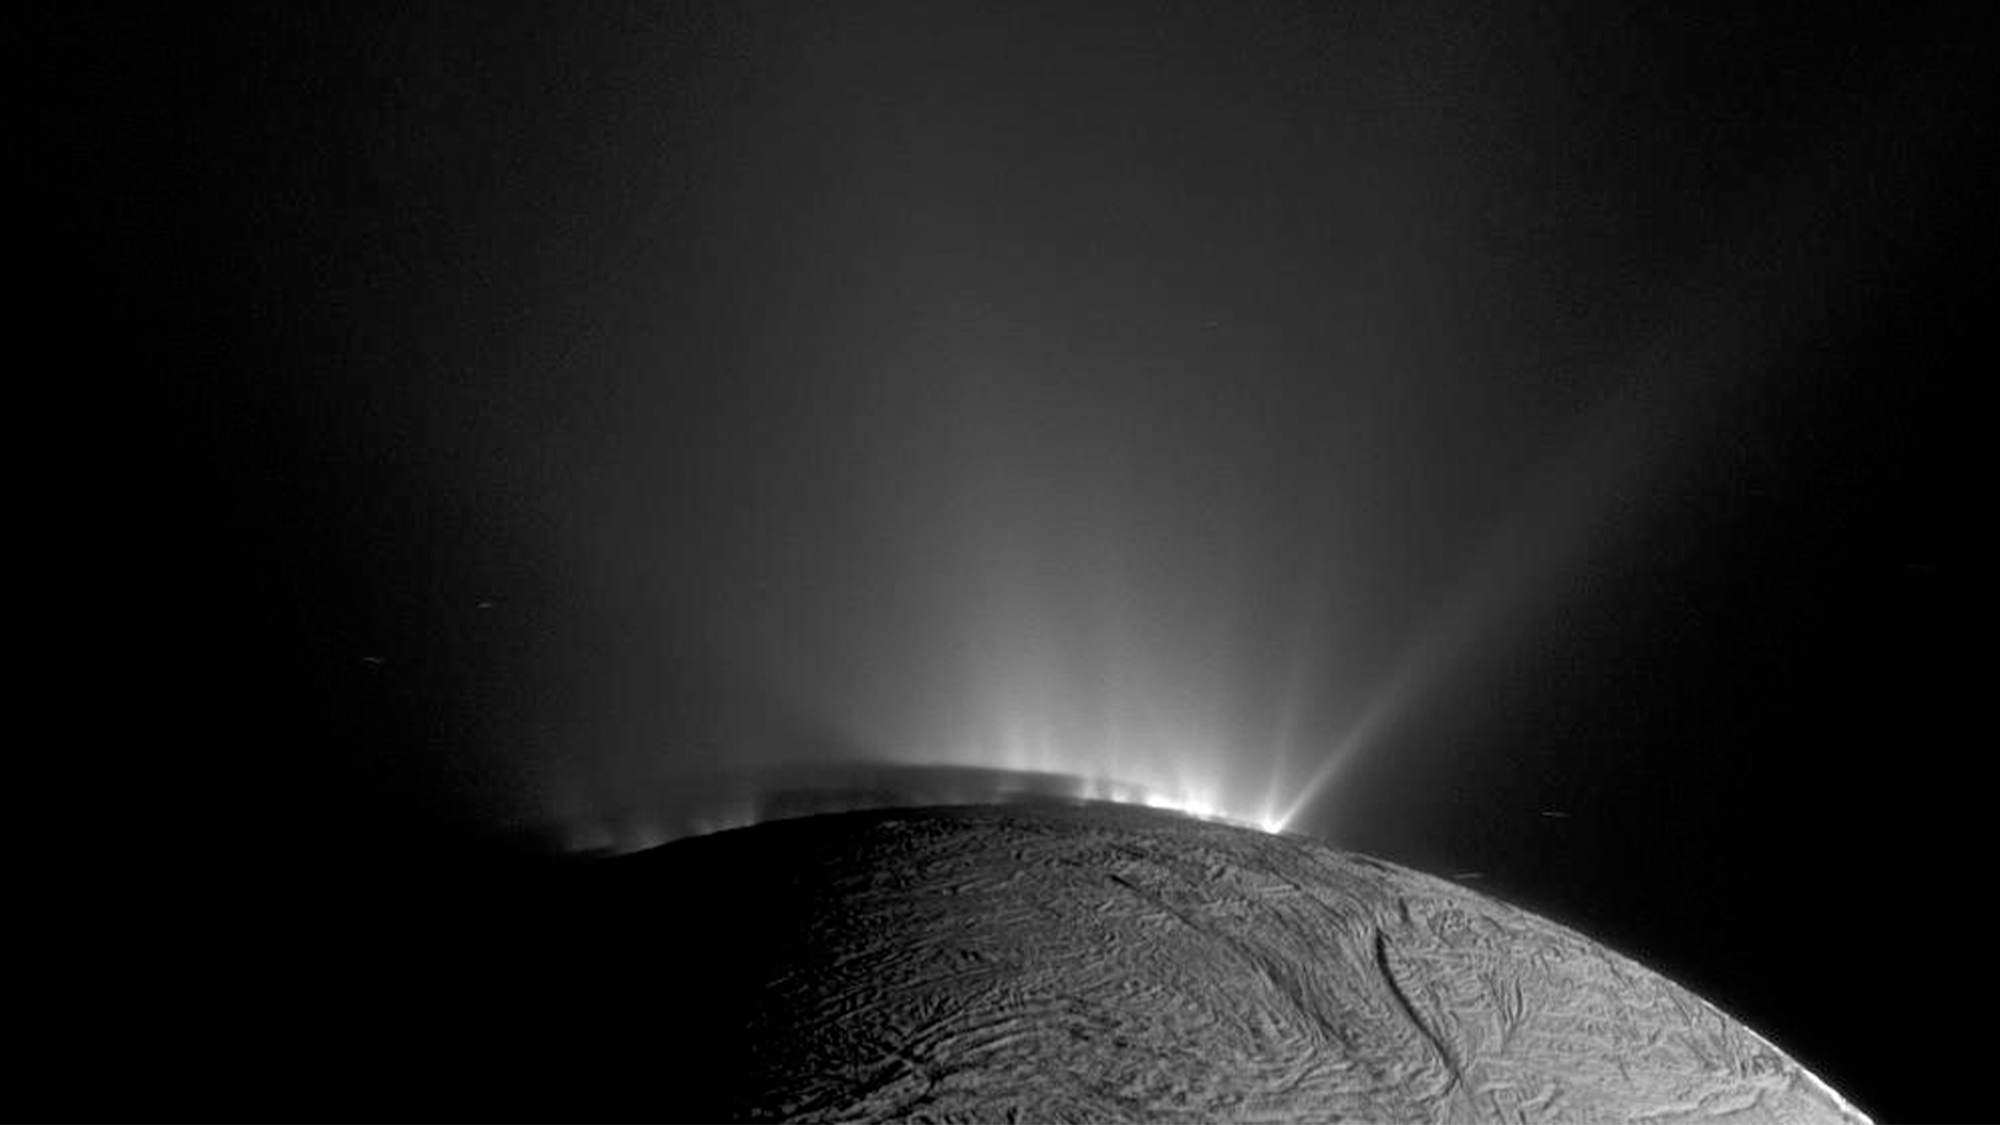 More evidence for key ingredients to life detected on Saturn’s moon Enceladus